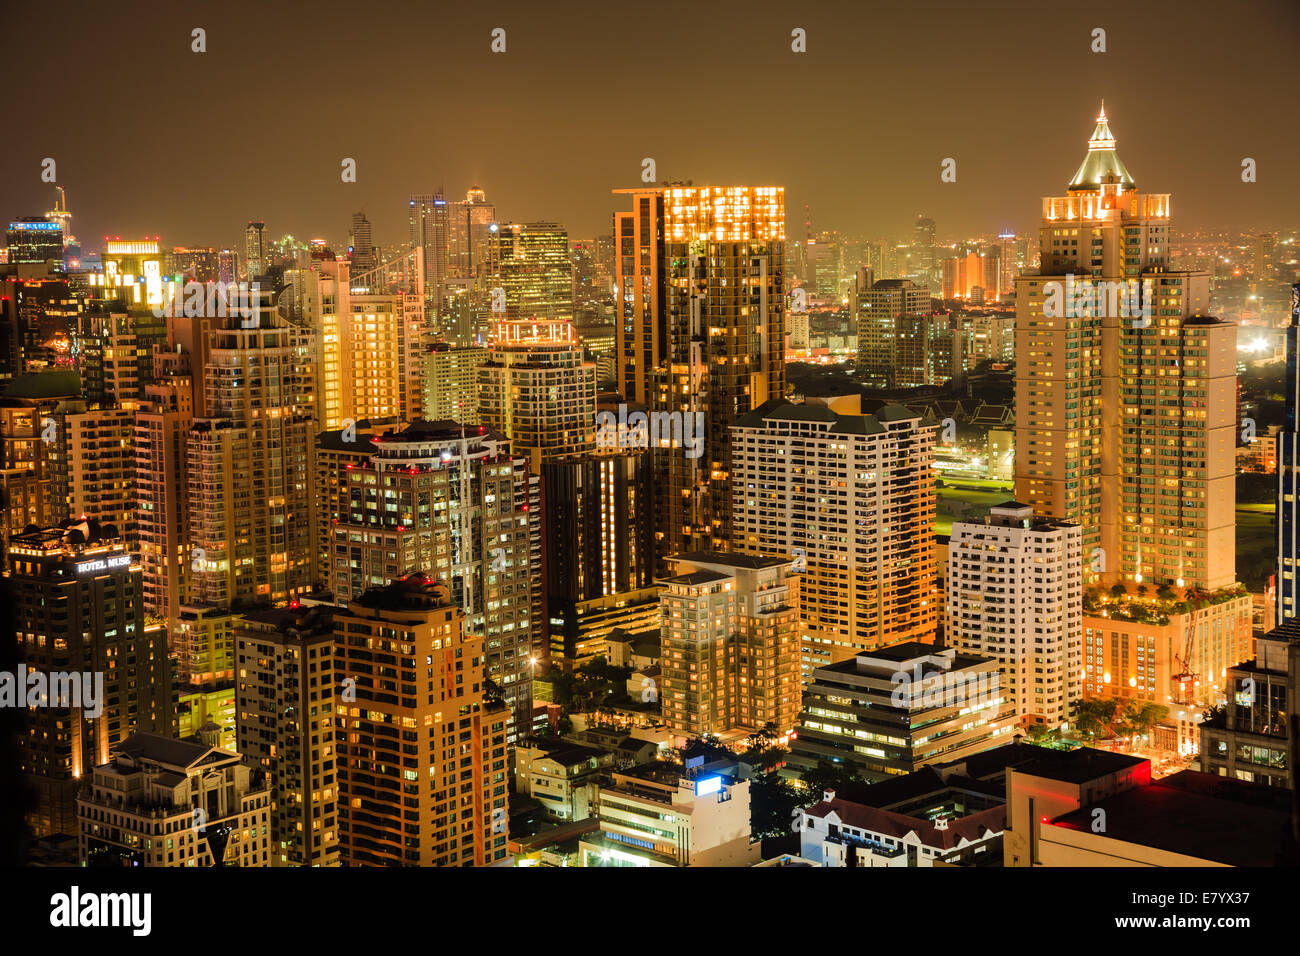 View of Bangkok skyline in the night. This picture was taken at the commercial center of Bangkok, Thailand. Stock Photo